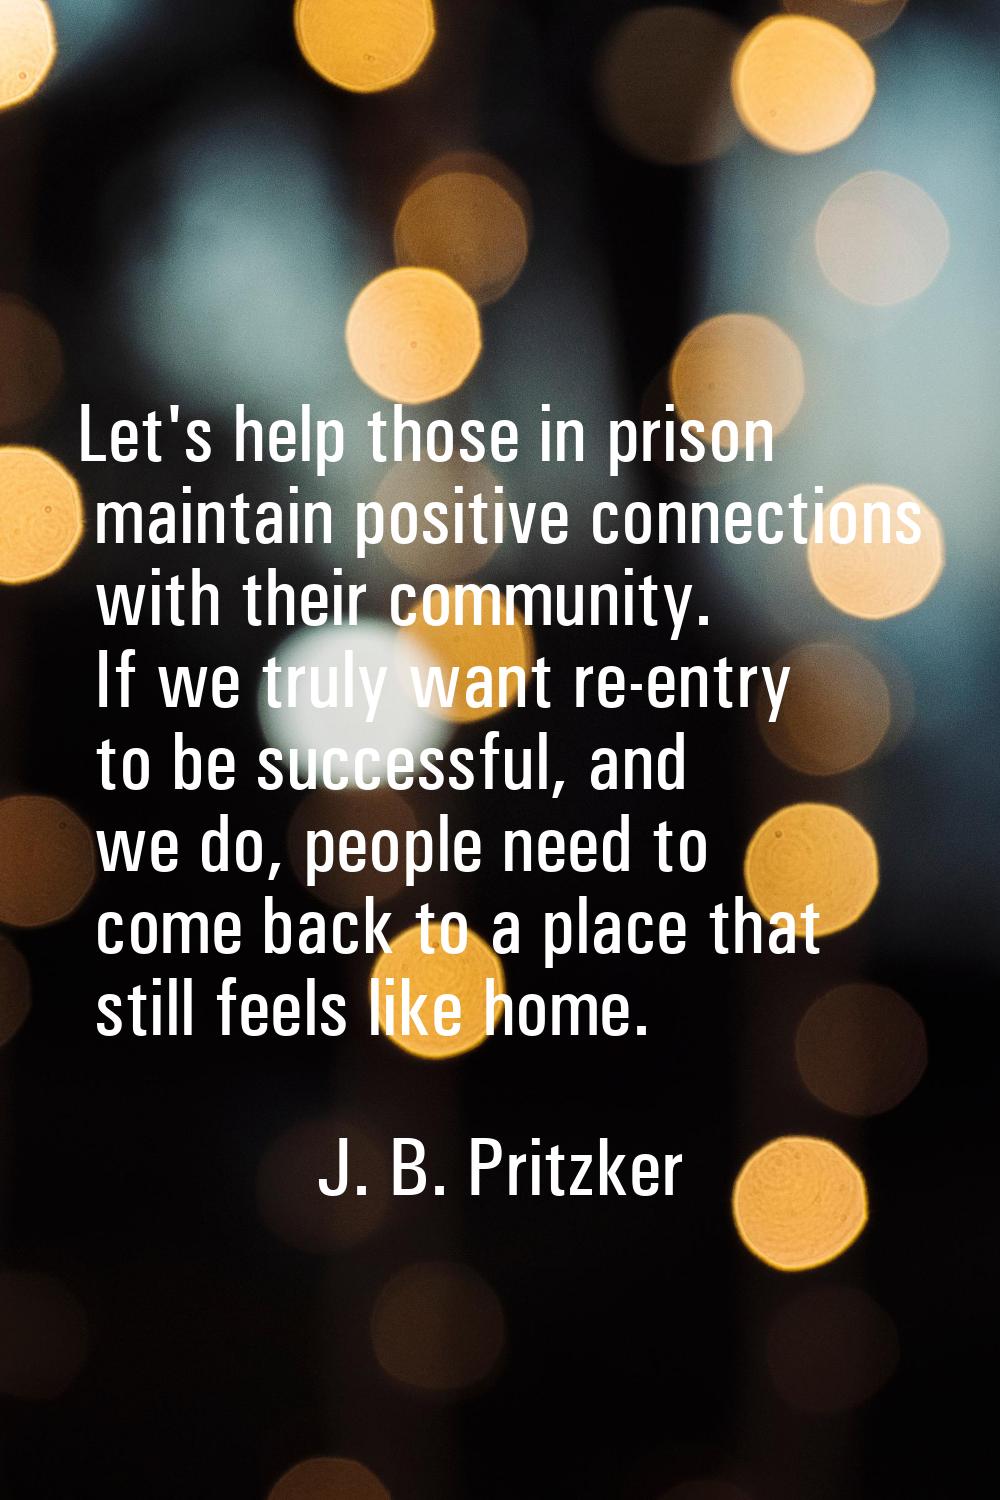 Let's help those in prison maintain positive connections with their community. If we truly want re-